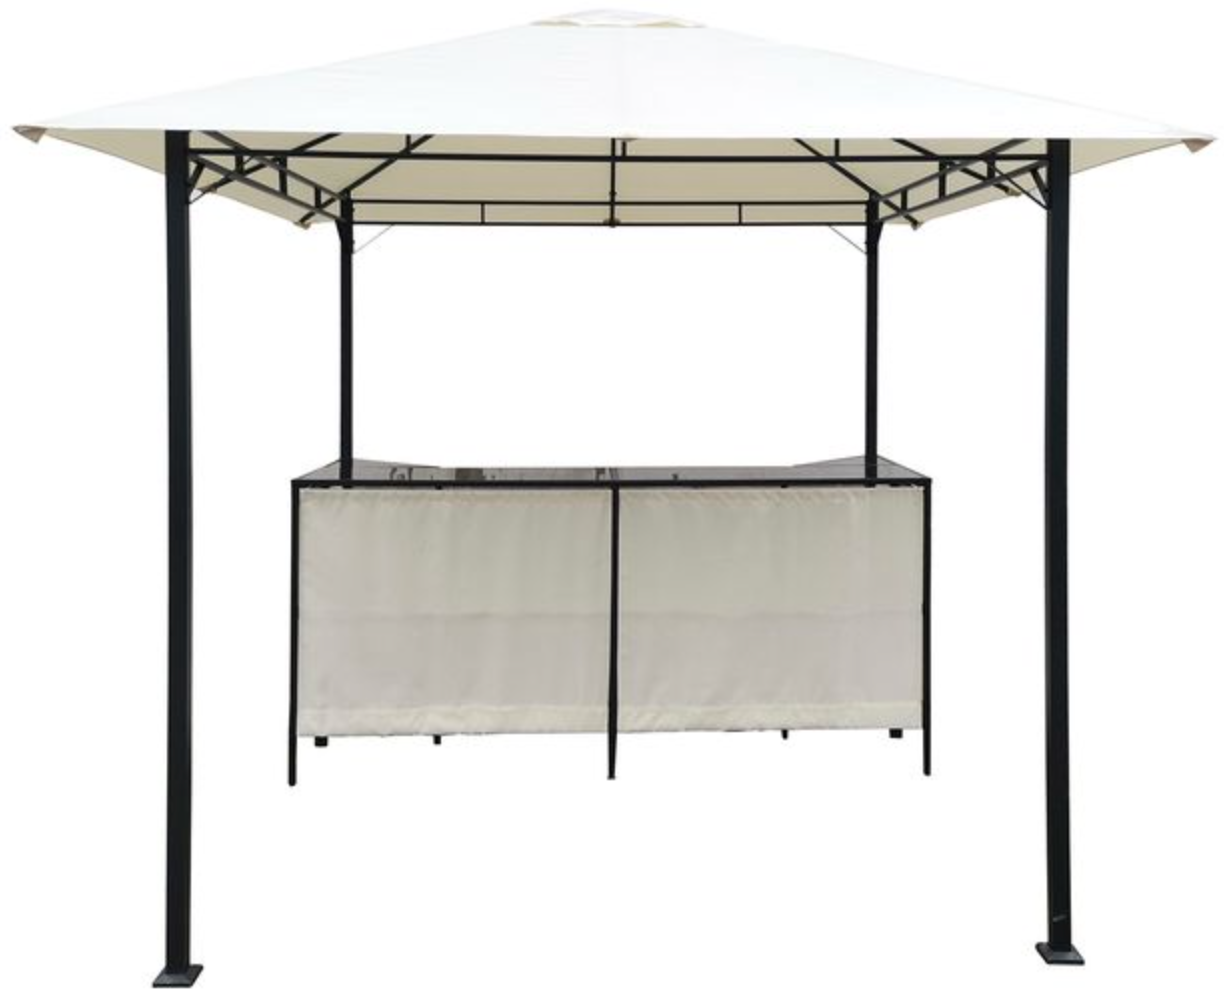 The Range is selling a &#8216;party gazebo&#8217; that turns your garden into a pub, The Manc